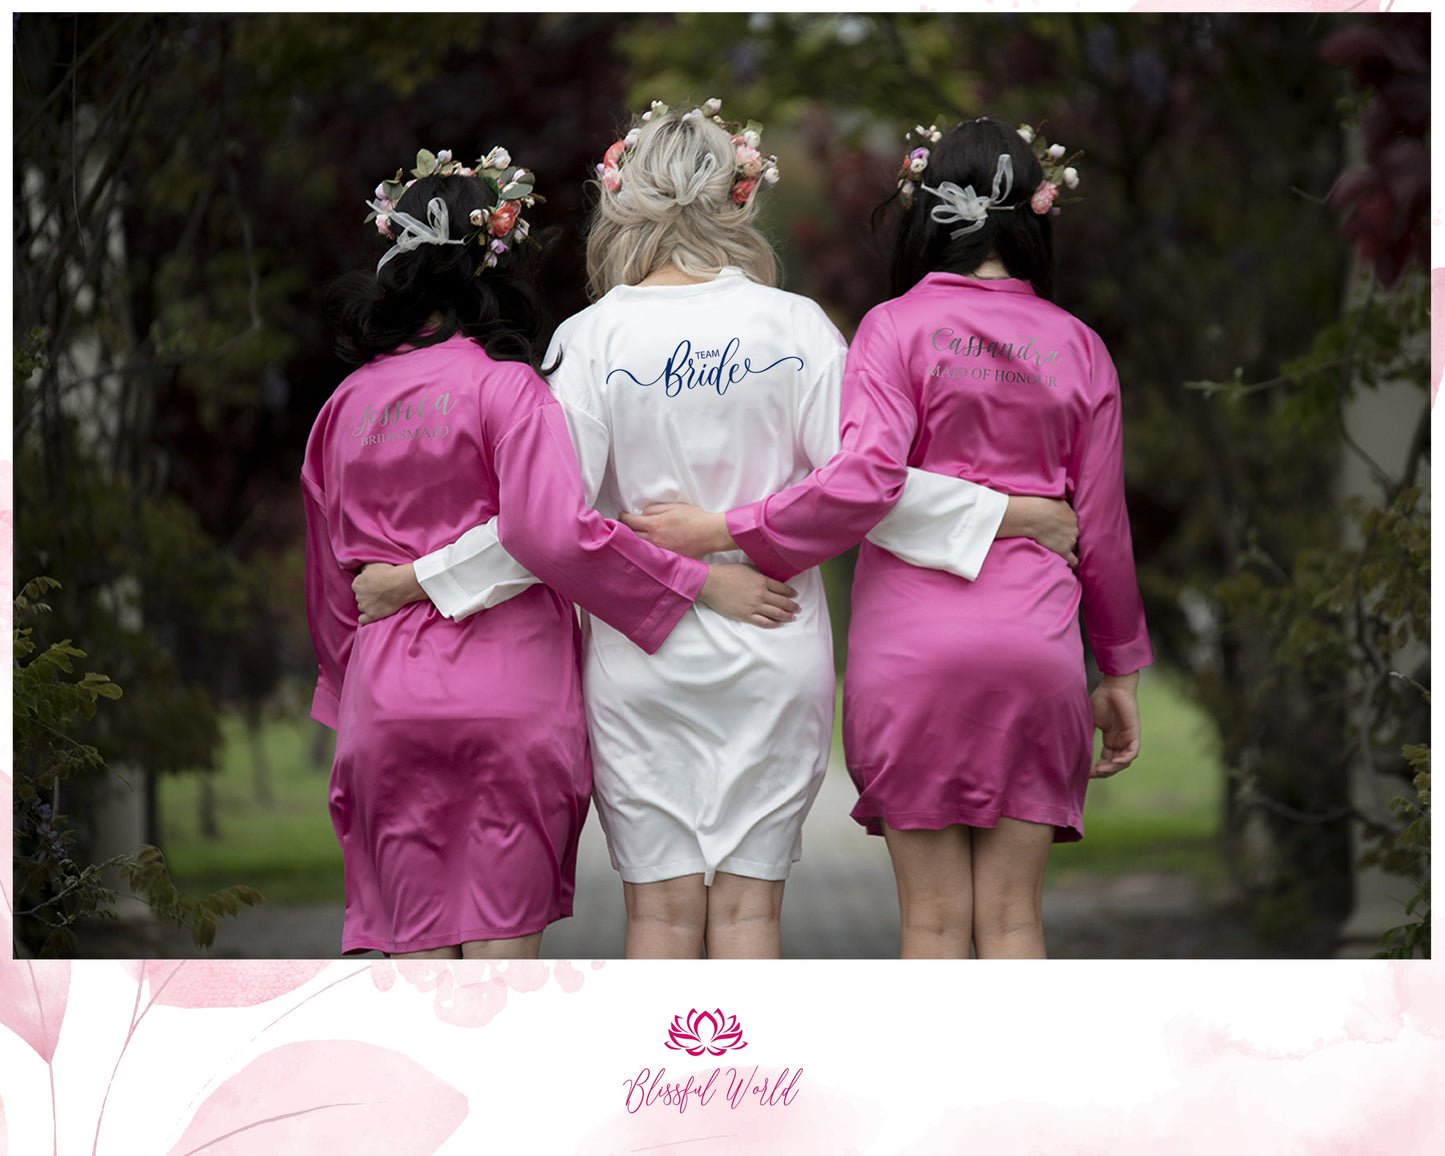 Set Of Robes Customized Kimono Robes Bridal Robes Bridesmaid Robes Satin Robes Personalized Robes Bridal Robes Gift For Her Wedding Gift